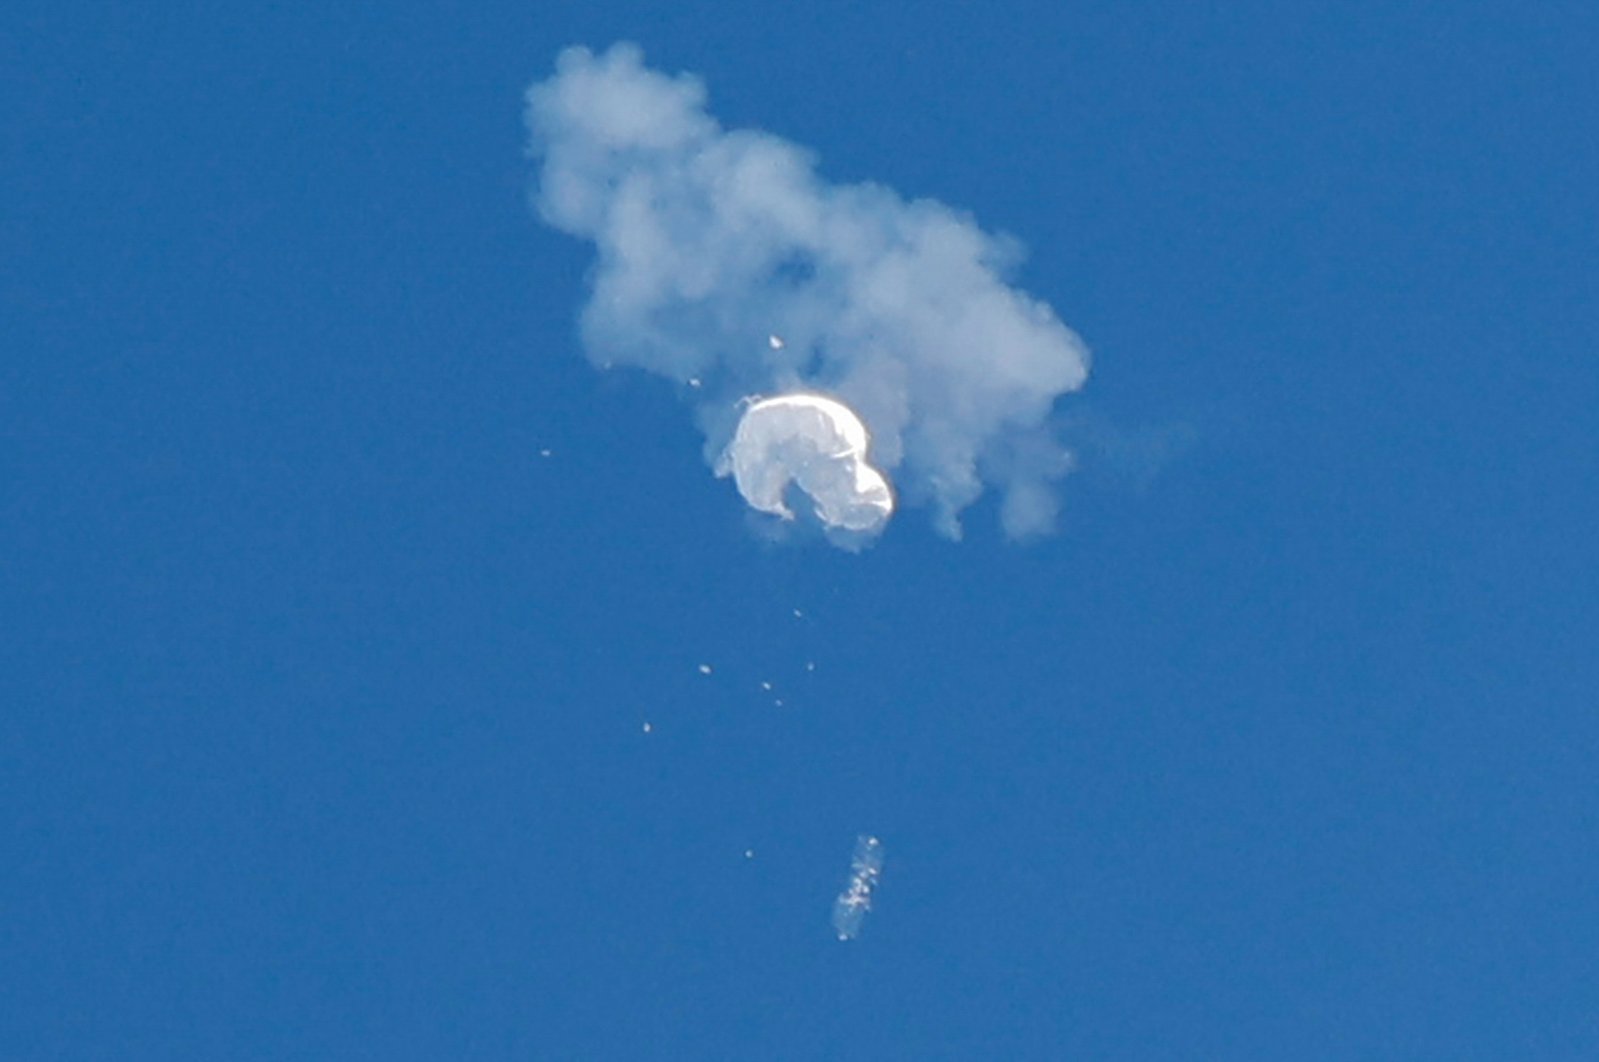 The suspected Chinese spy balloon drifts to the ocean after being shot down off the coast in Surfside Beach, South Carolina, U.S., Feb. 4, 2023. (Reuters Photo)